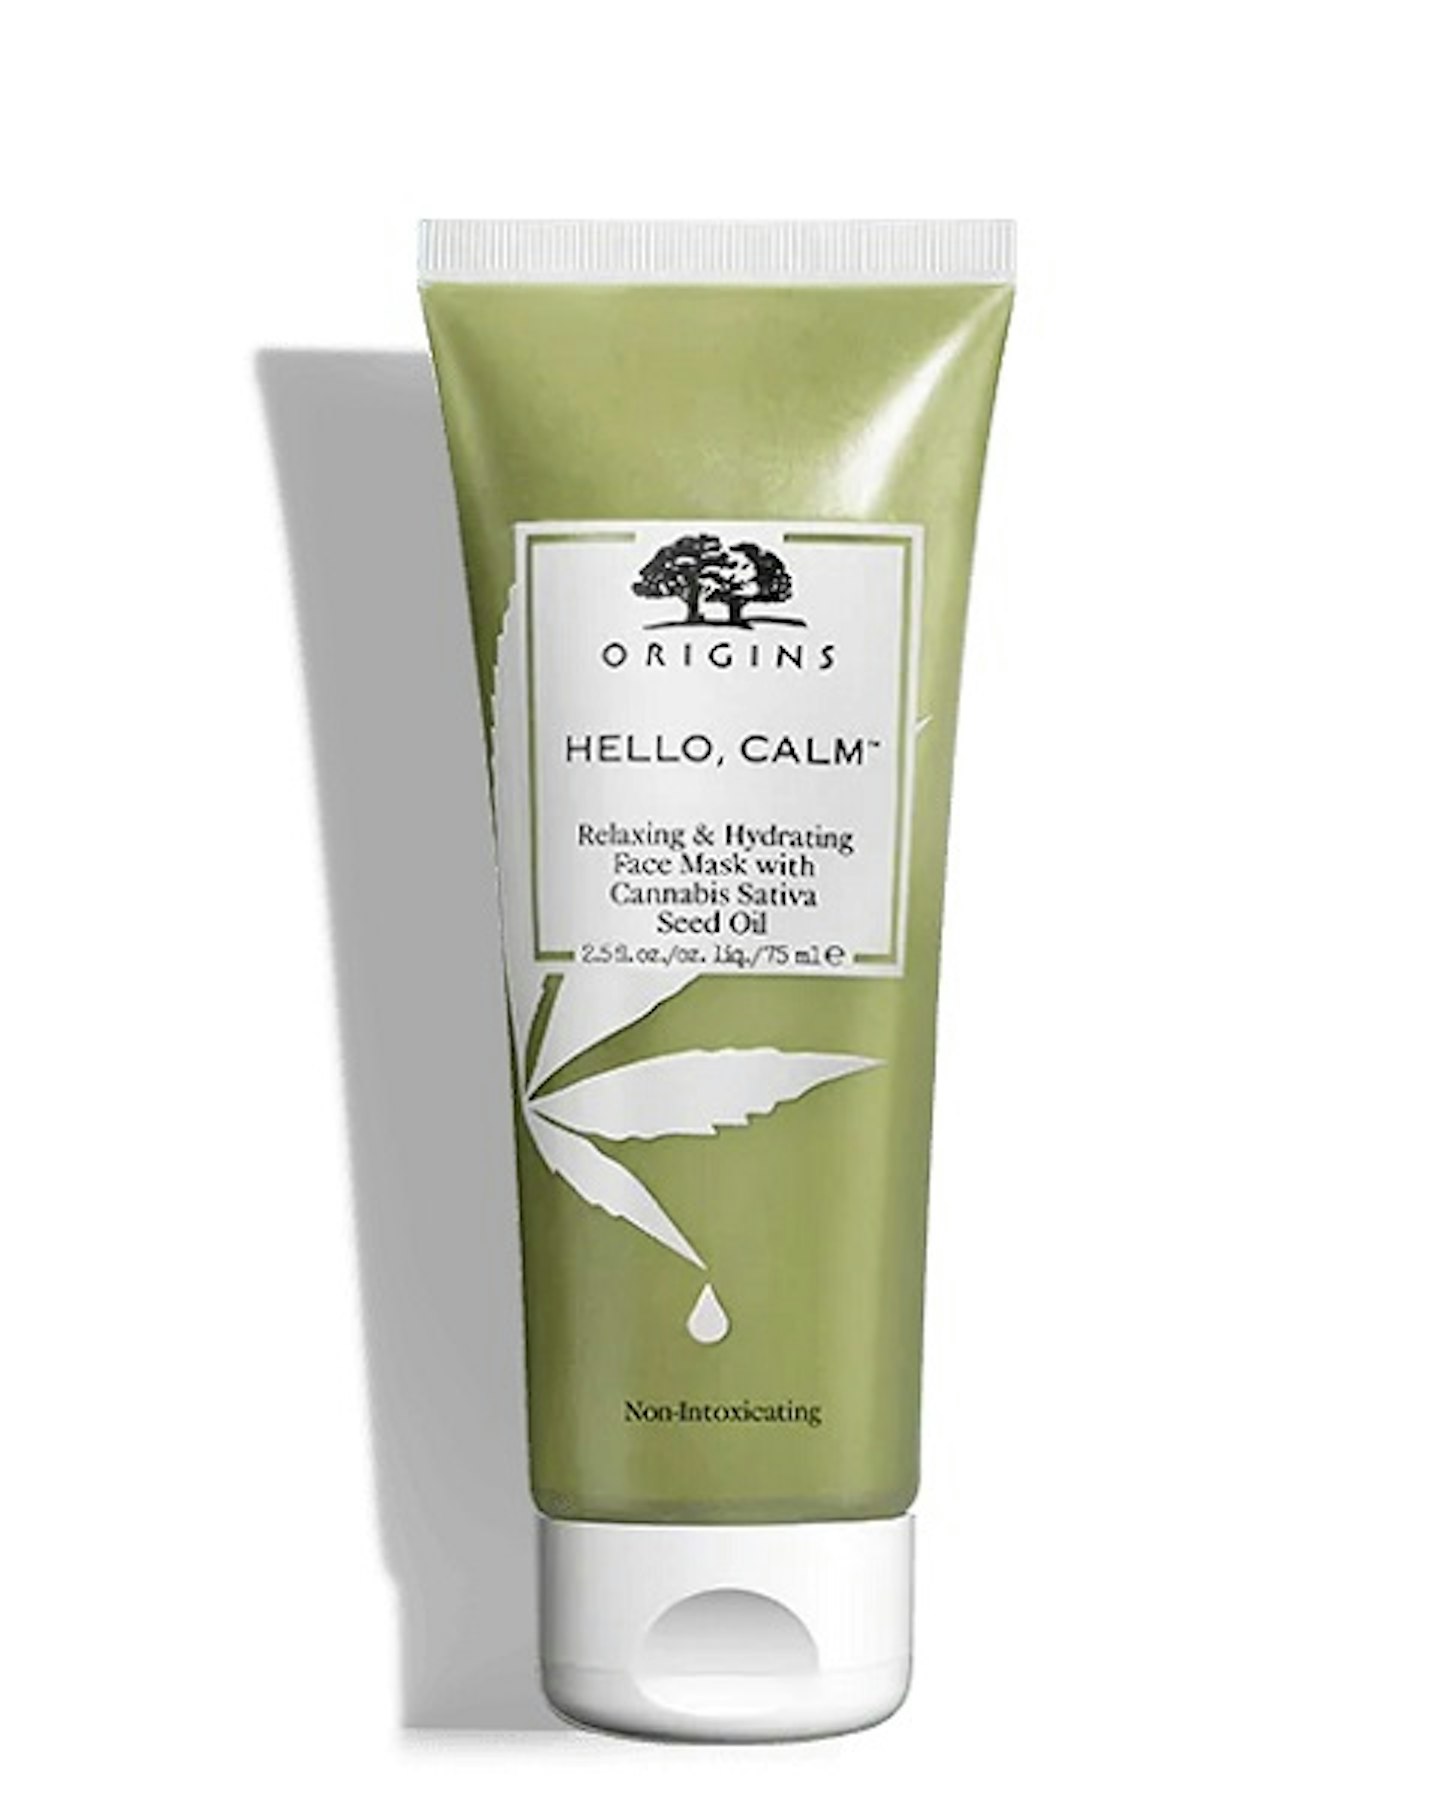 Origins HELLO, Calm Relaxing & Hydrating Face Mask with Cannabis Sativa Seed Oil, £25